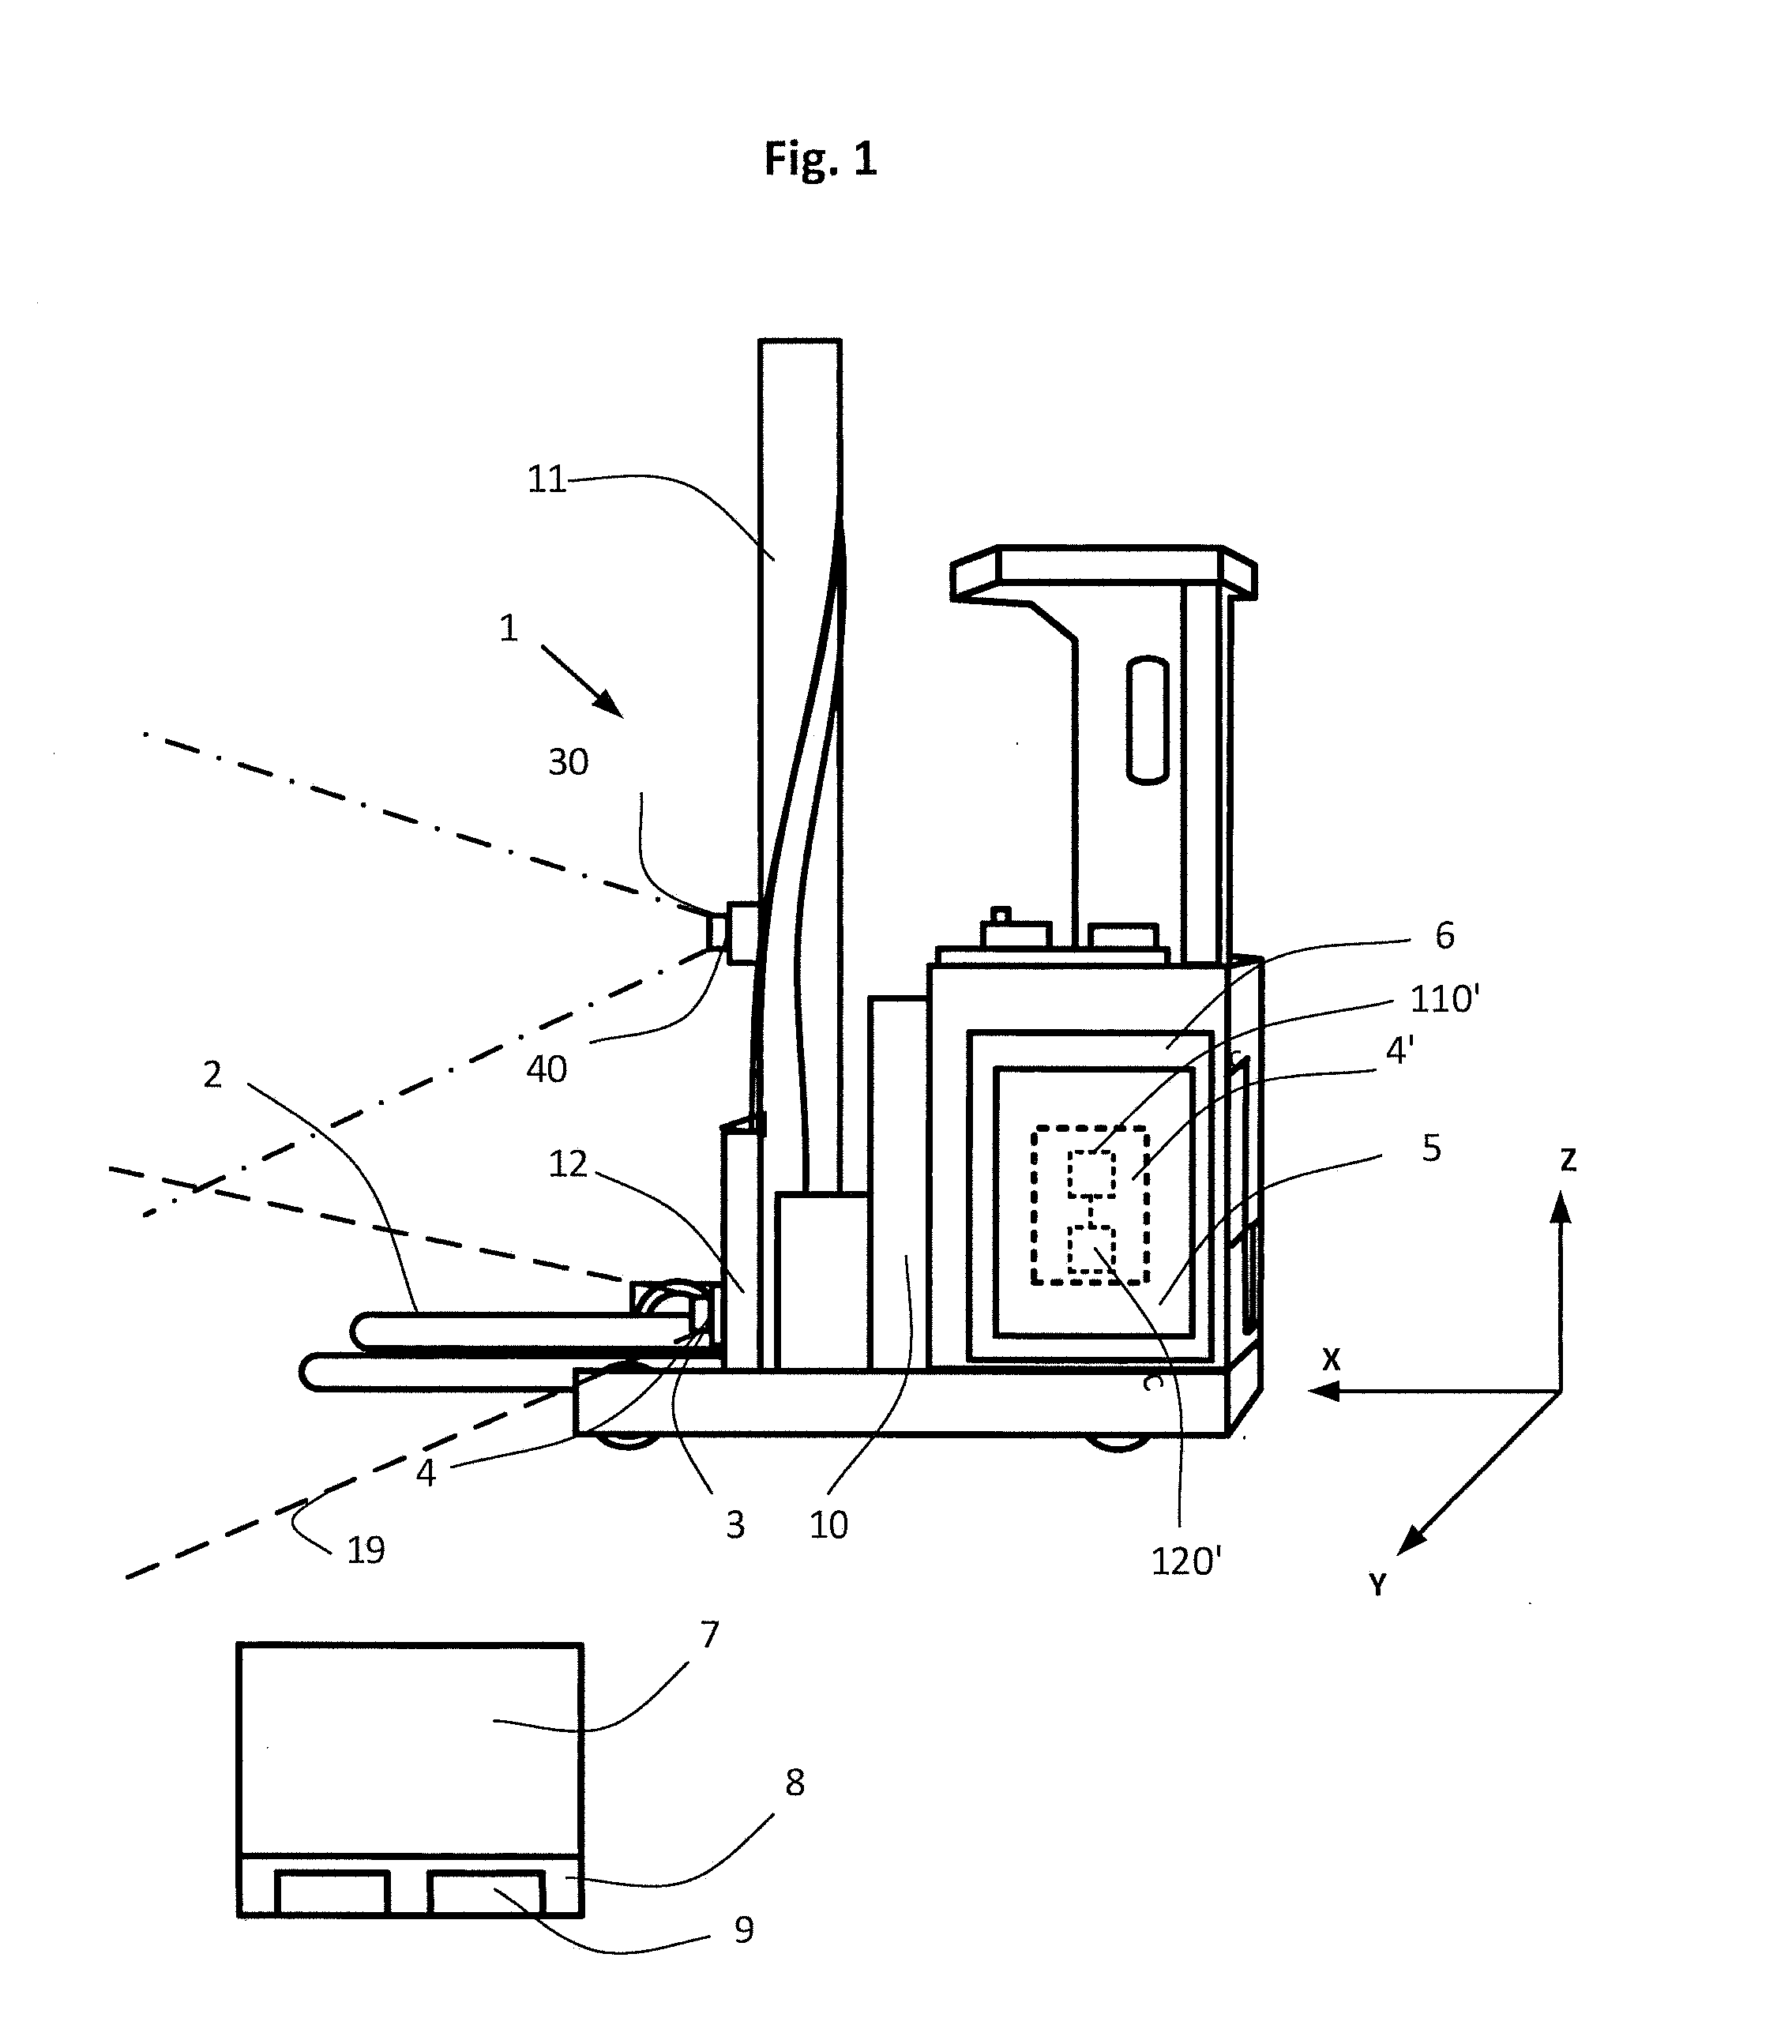 Fork-Lift Truck And Method For Operating a Fork-Lift Truck